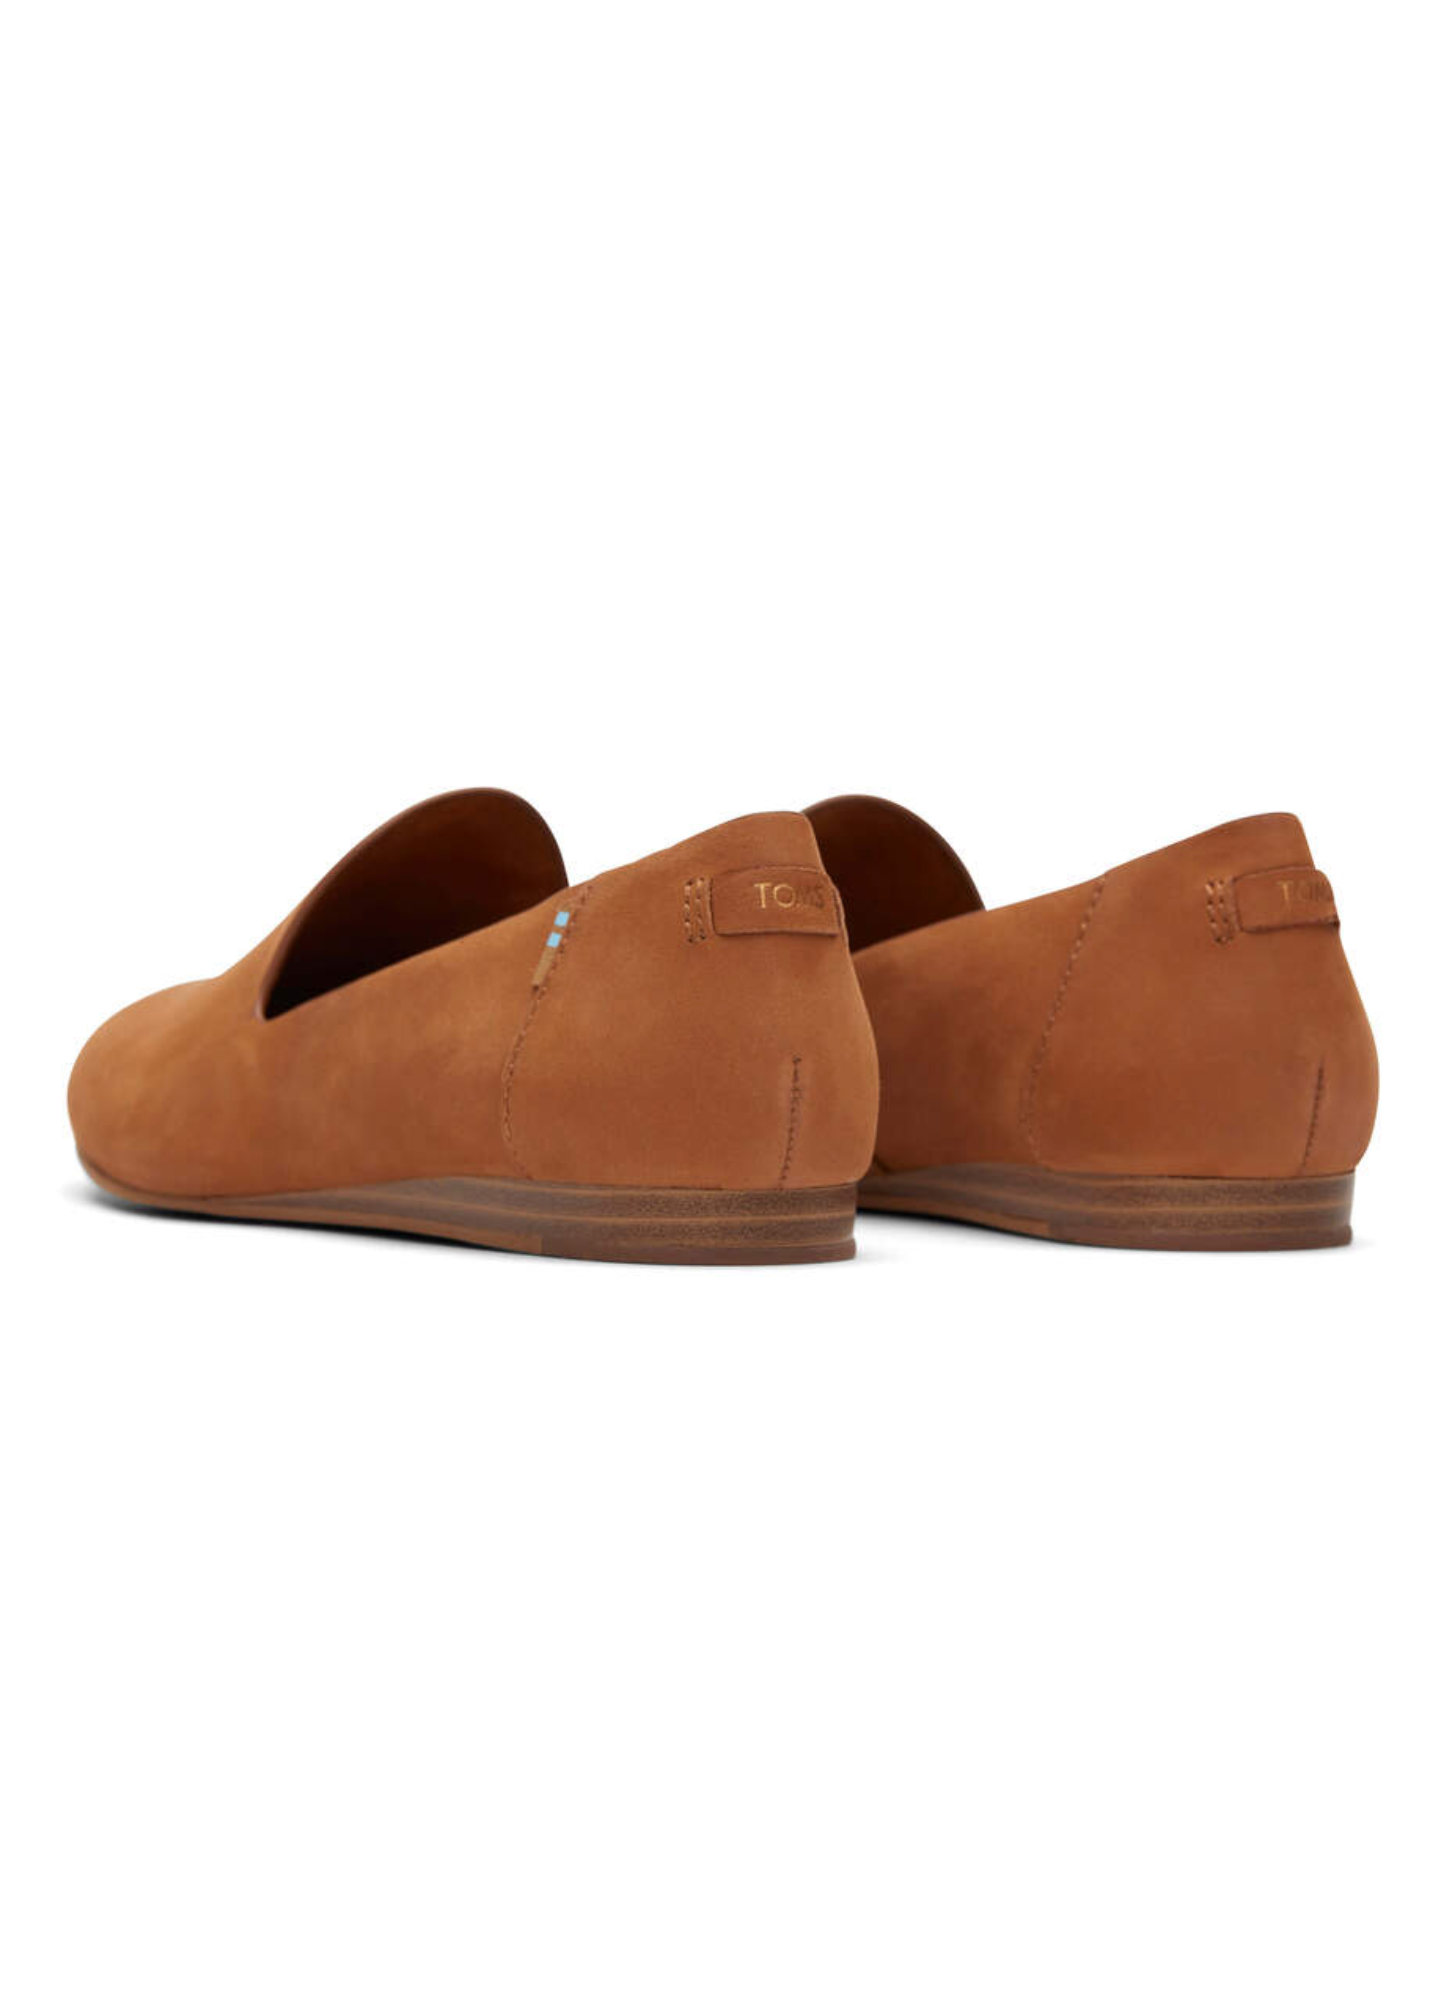 TOMS® Darcy Flat Shoes